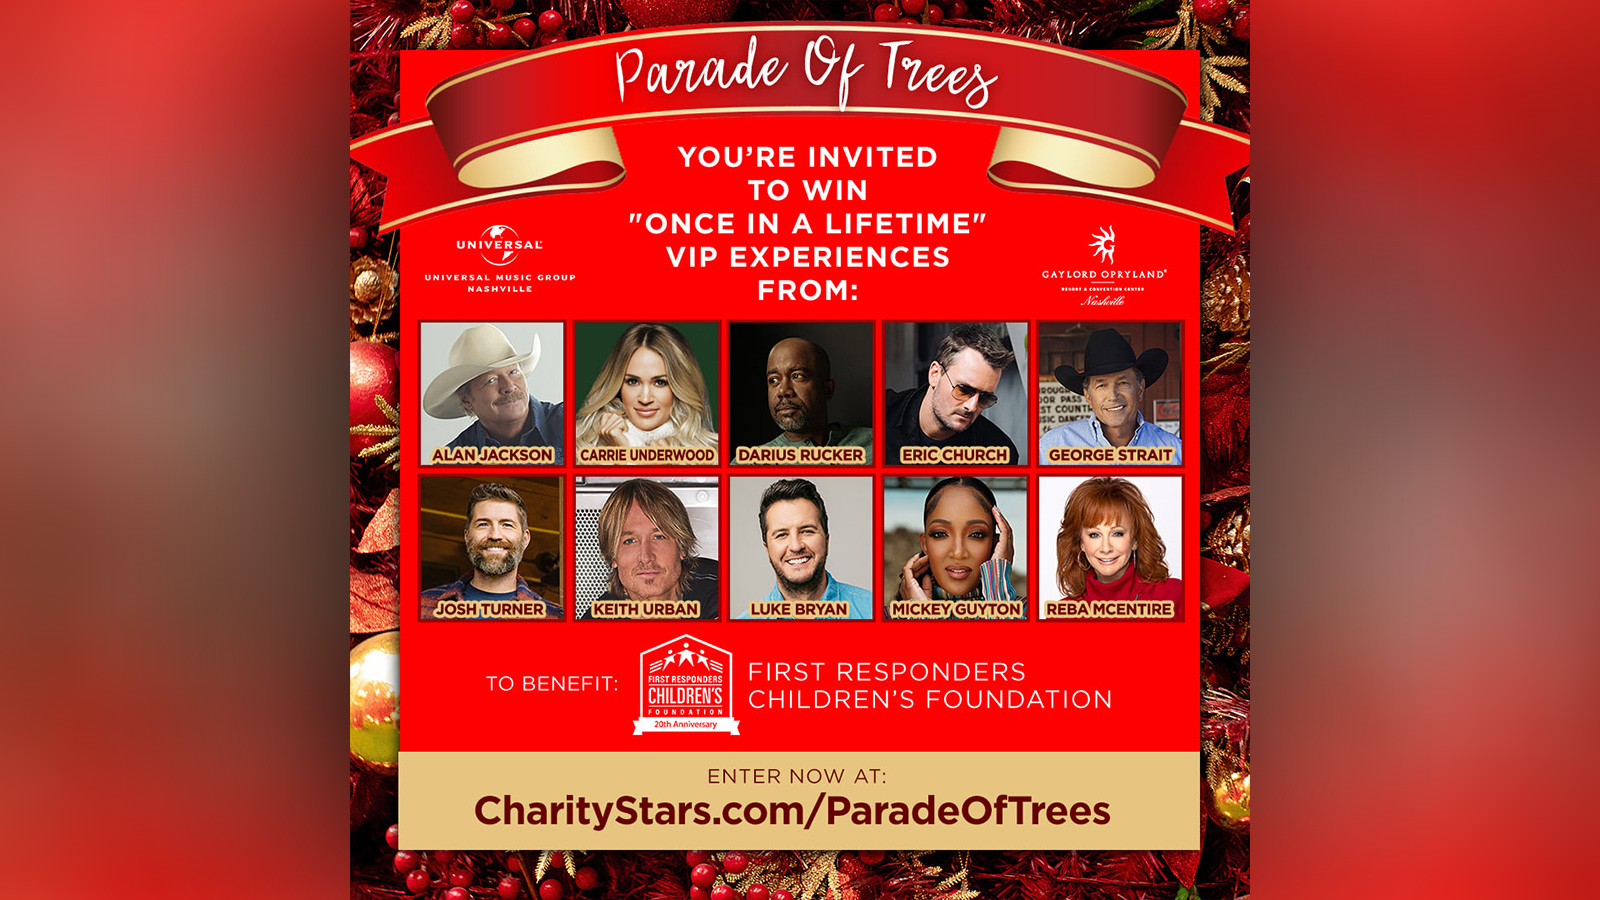 FRCF Announces Donation From Universal Music Group Nashville’s Parade Of Trees Sweepstakes